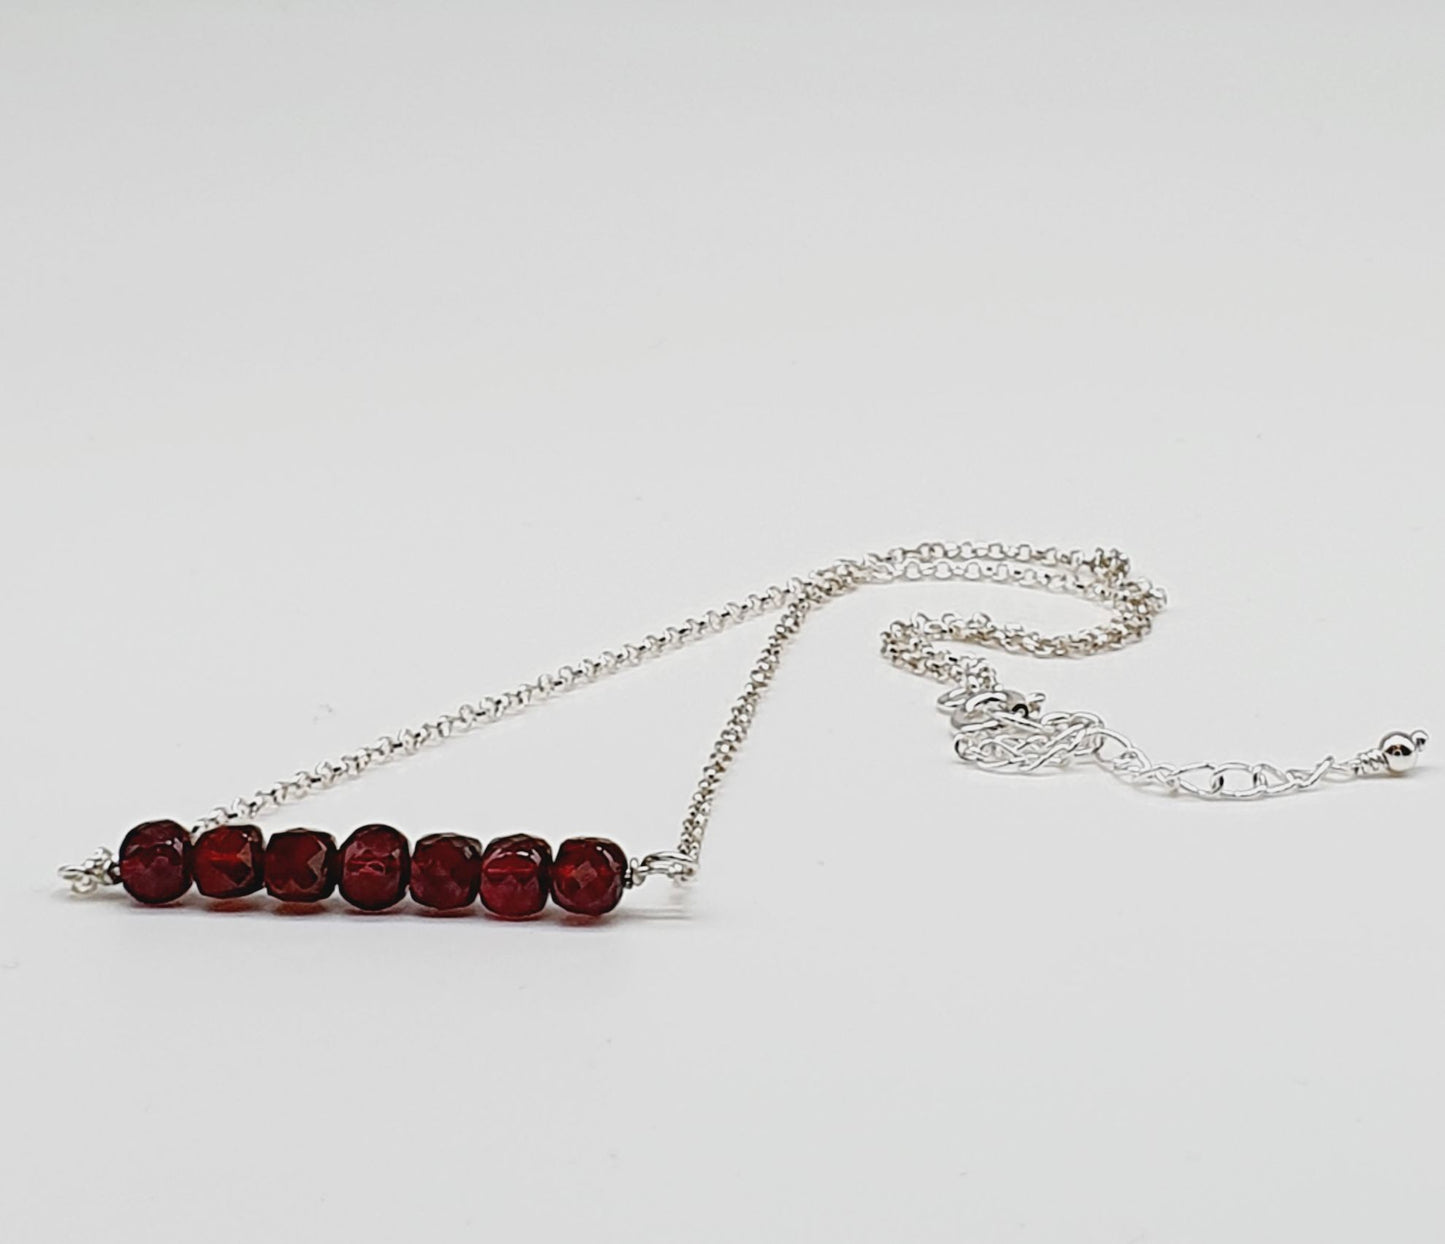 Garnet with 925 Sterling Silver Choker Necklace - January Birthstone